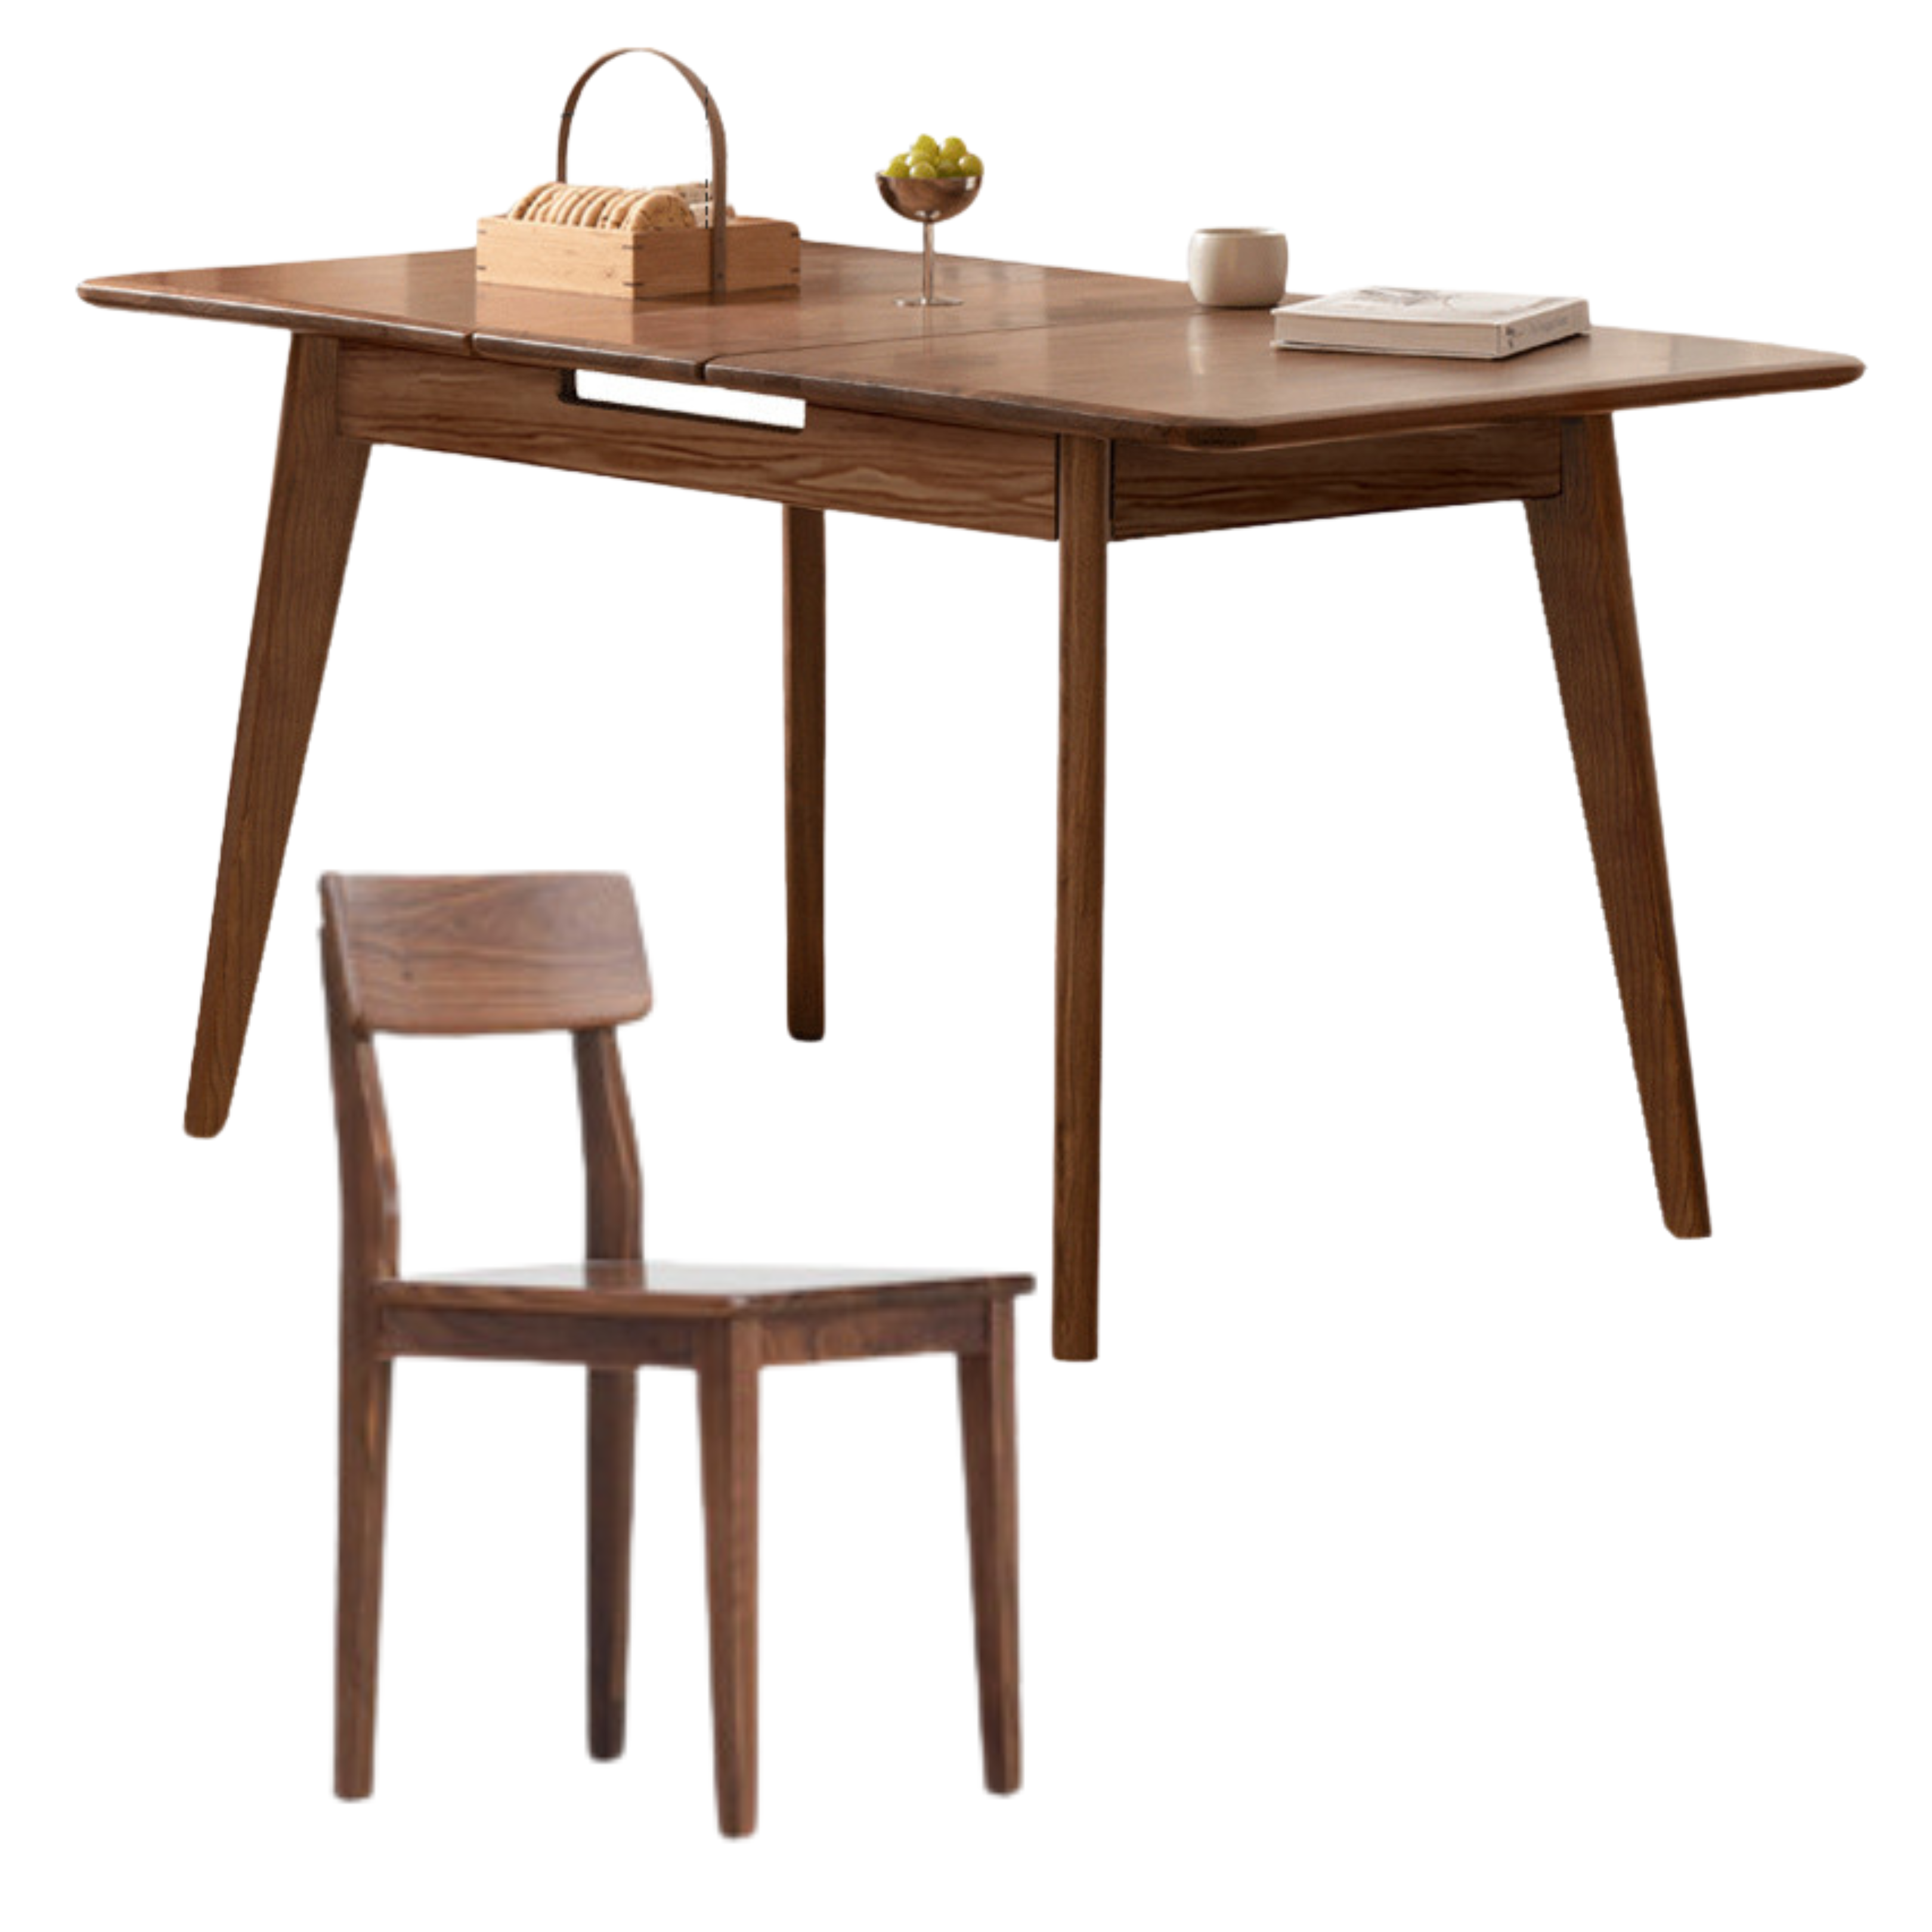 Black Walnut solid wood Telescopic retractable Dining Table